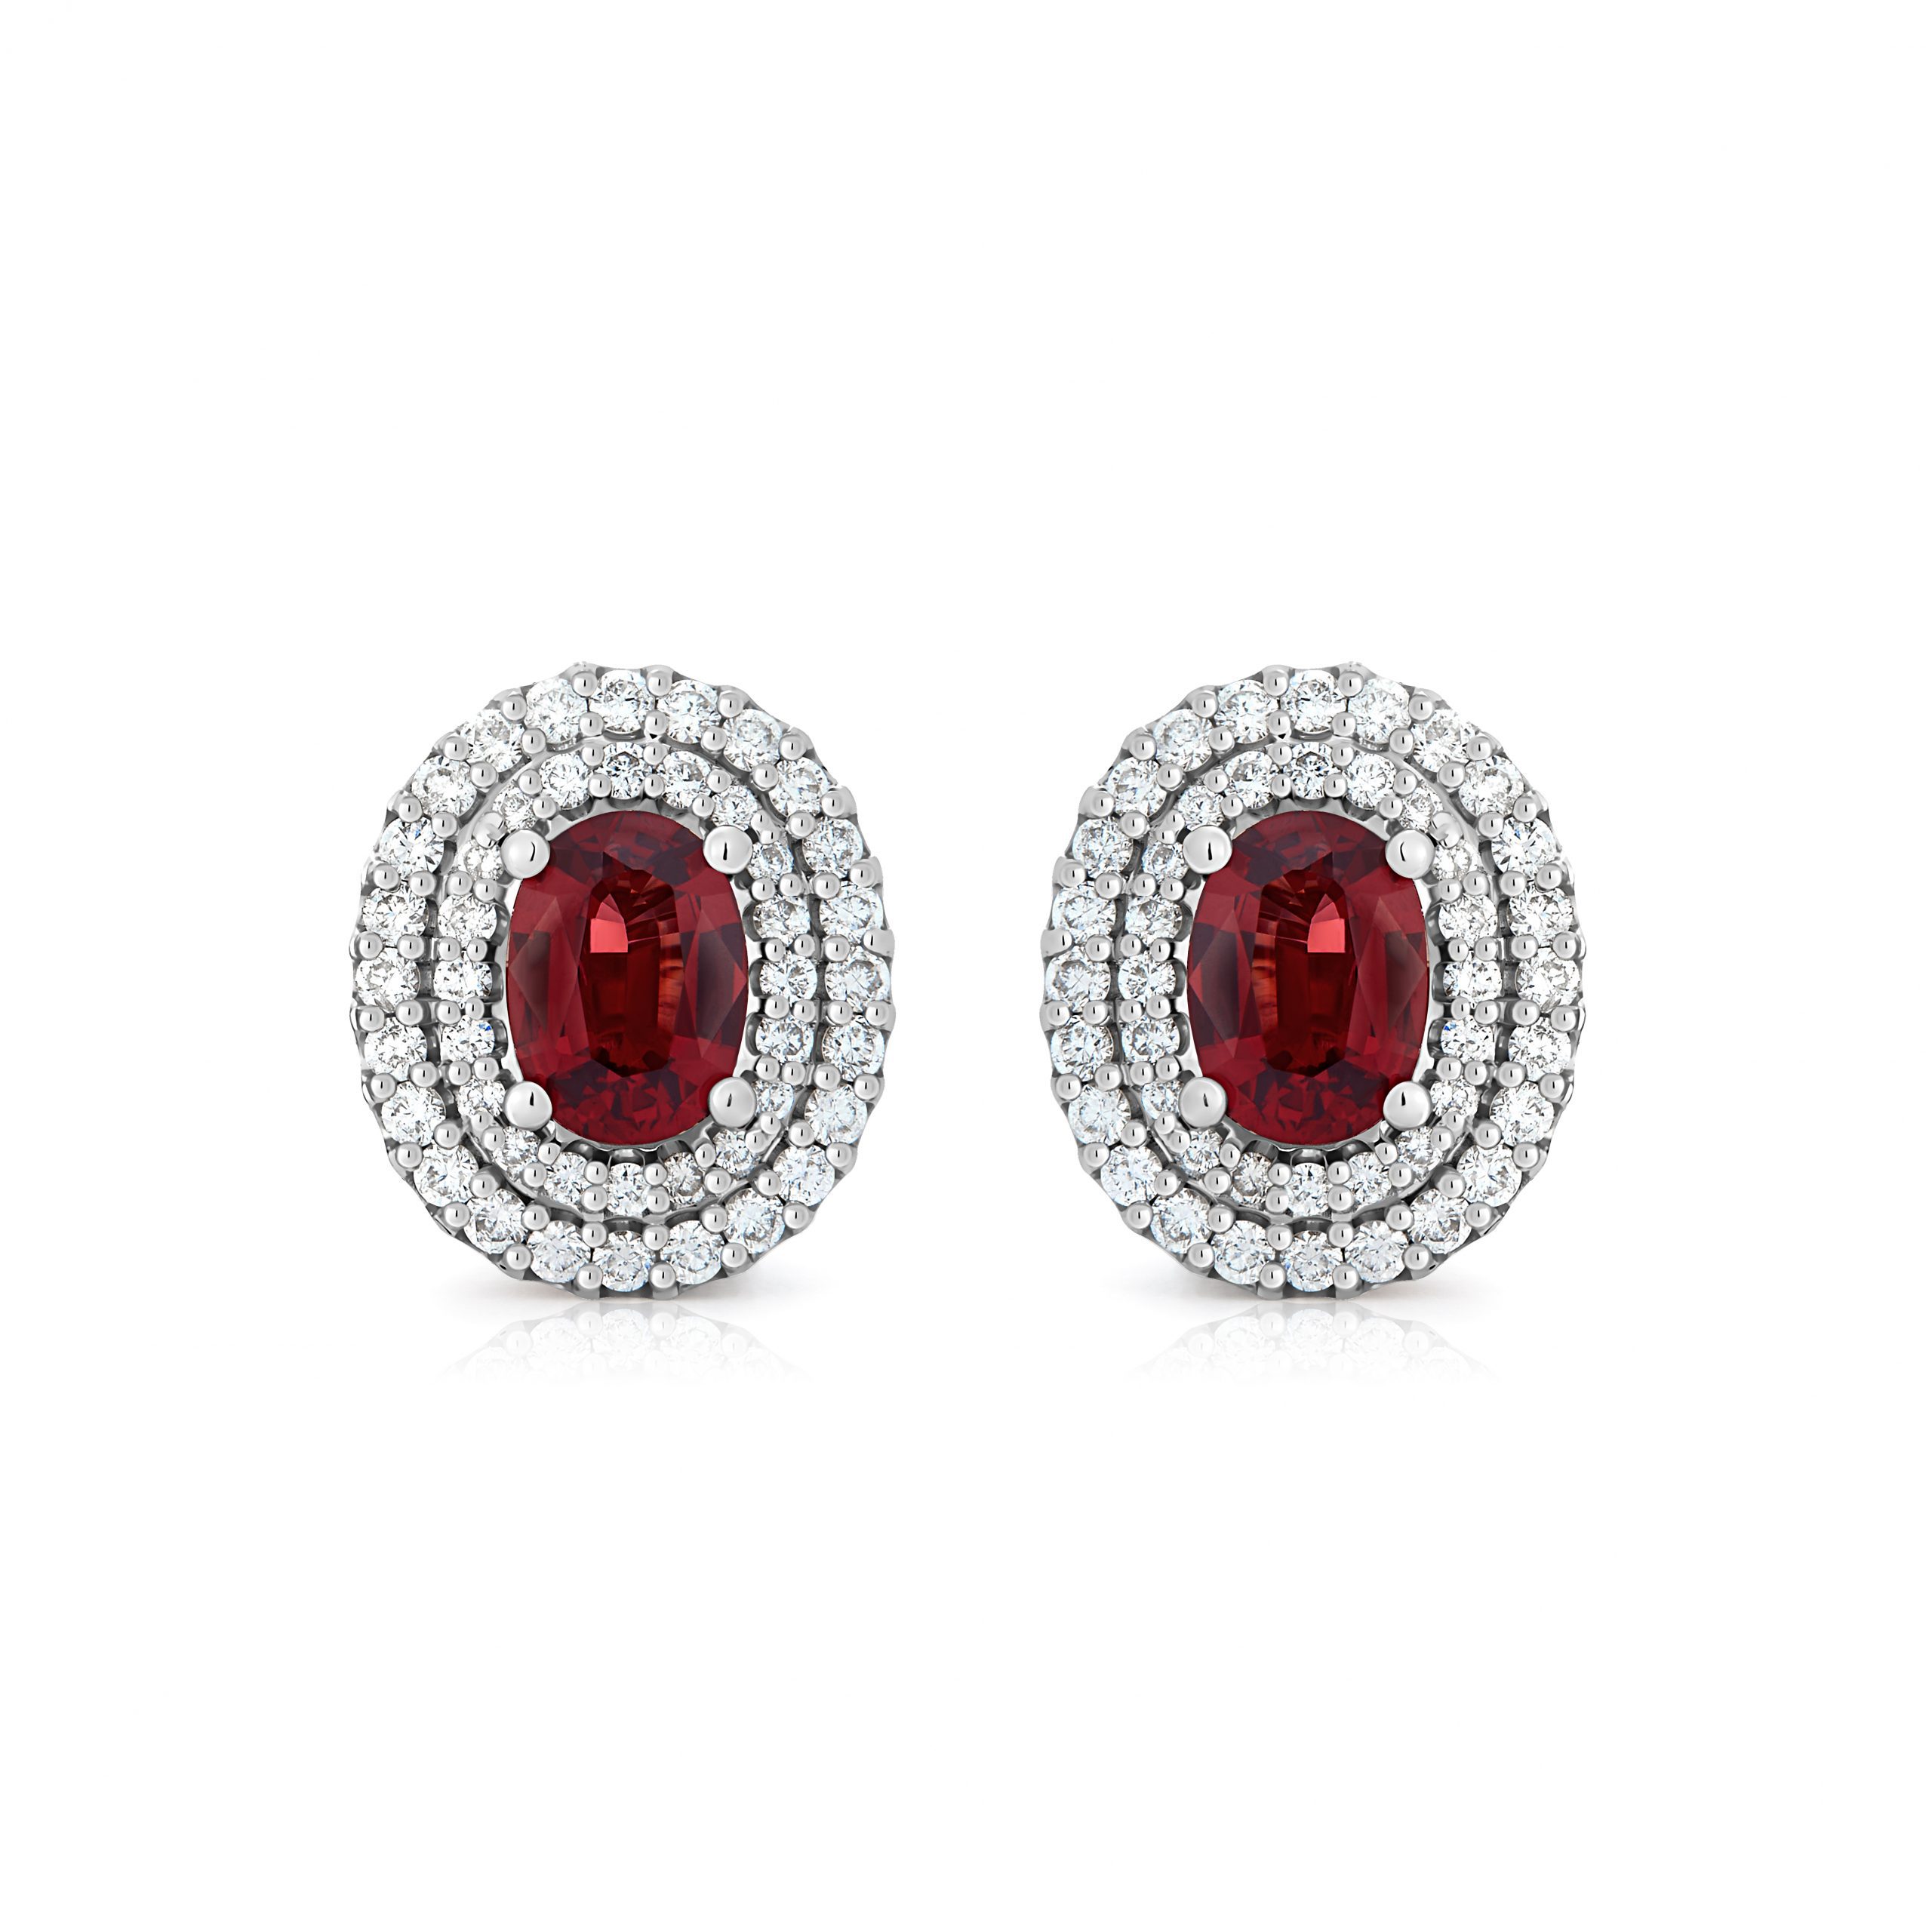 Spinel stud earrings with a total weight of 1.14 ct #1